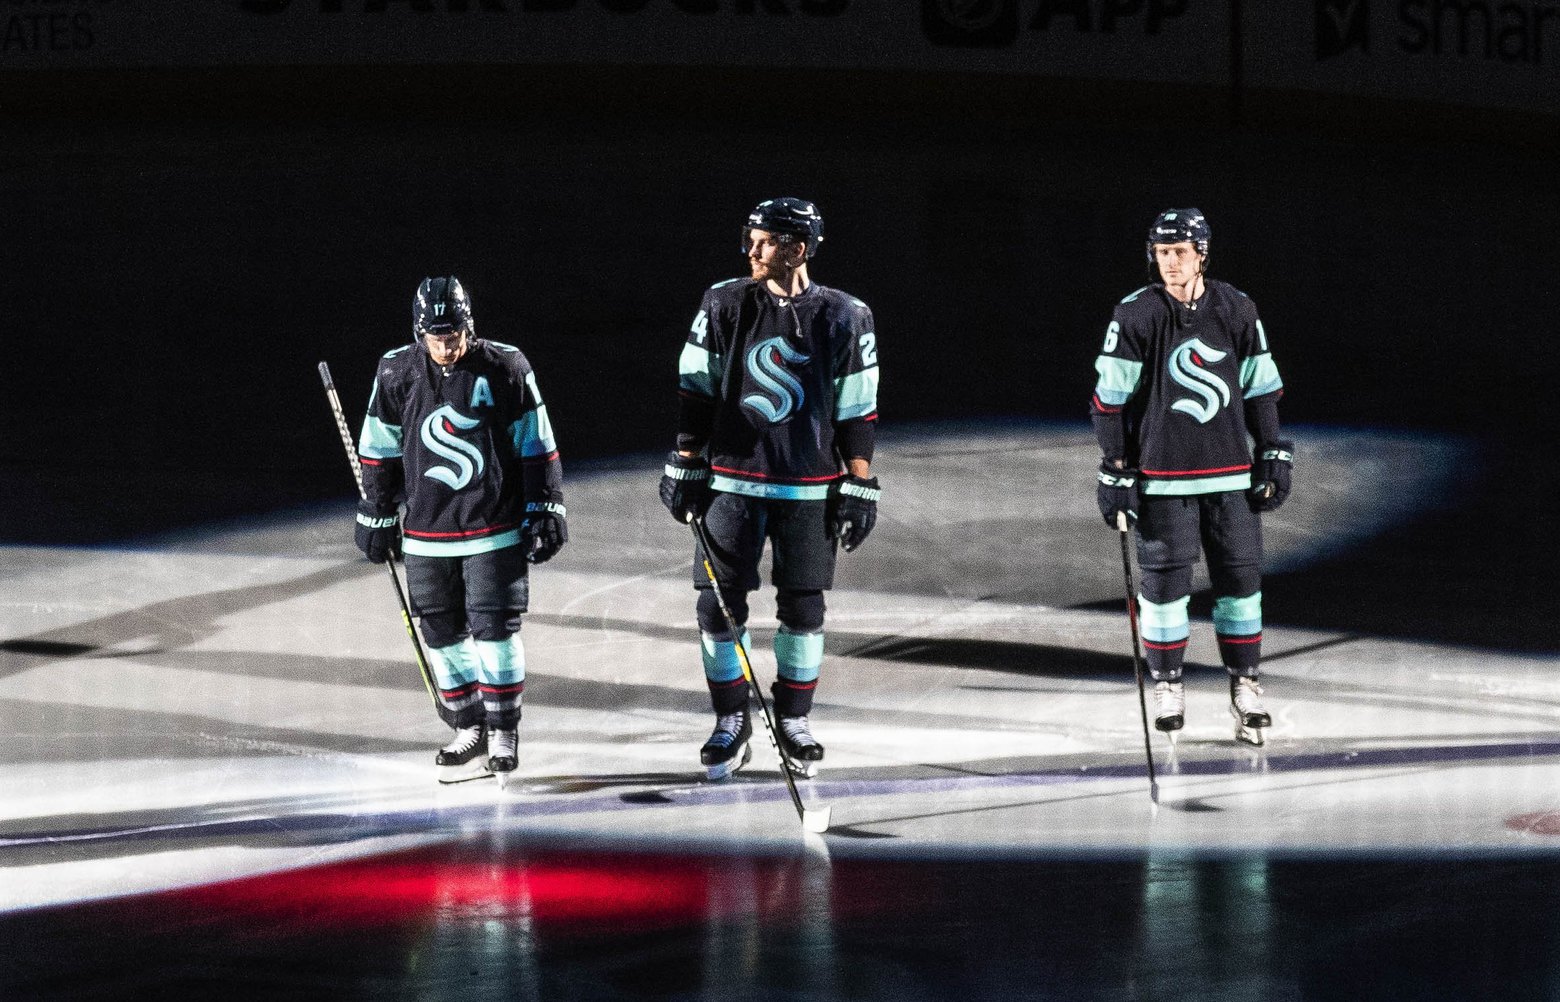 The Seattle Kraken take the ice for the first time against the Vancouver Canucks in exhibition play Sunday. The team made a great first impression with a 5-3 win.(Dean Rutz / The Seattle Times)